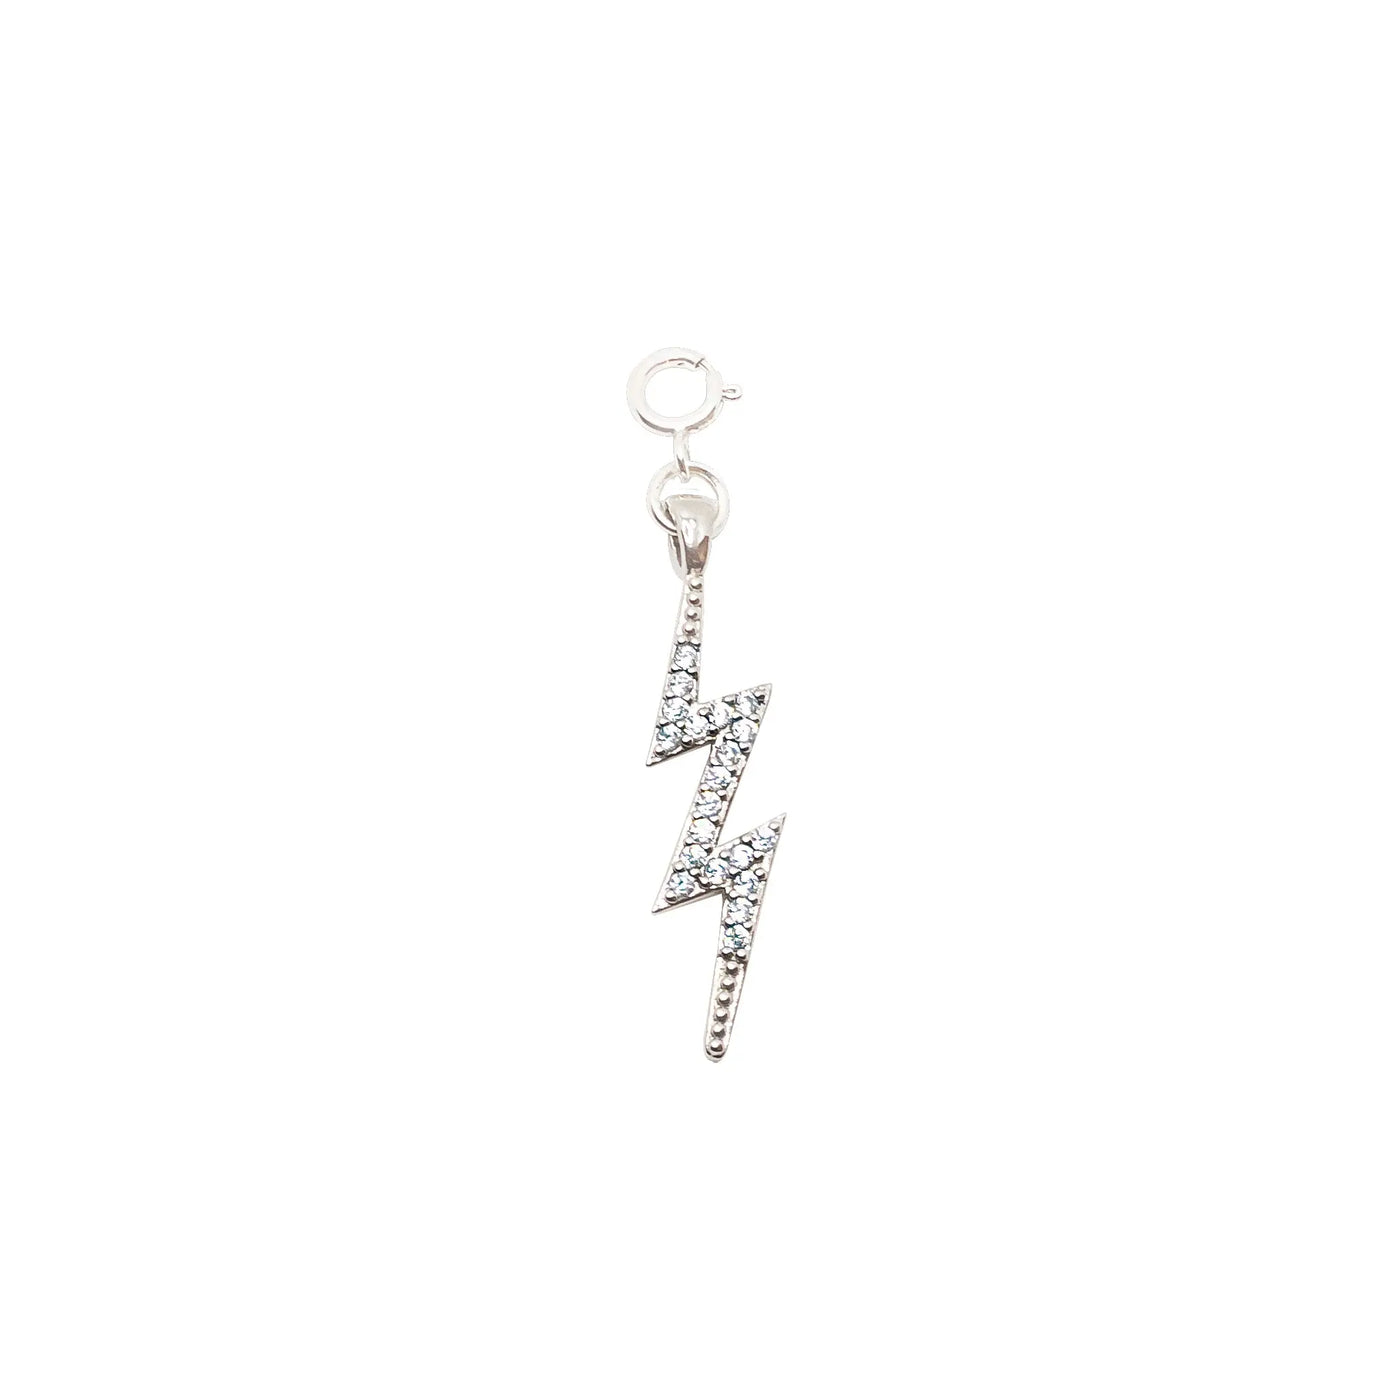 Lighting Bolt Silver Charm LaCkore Couture